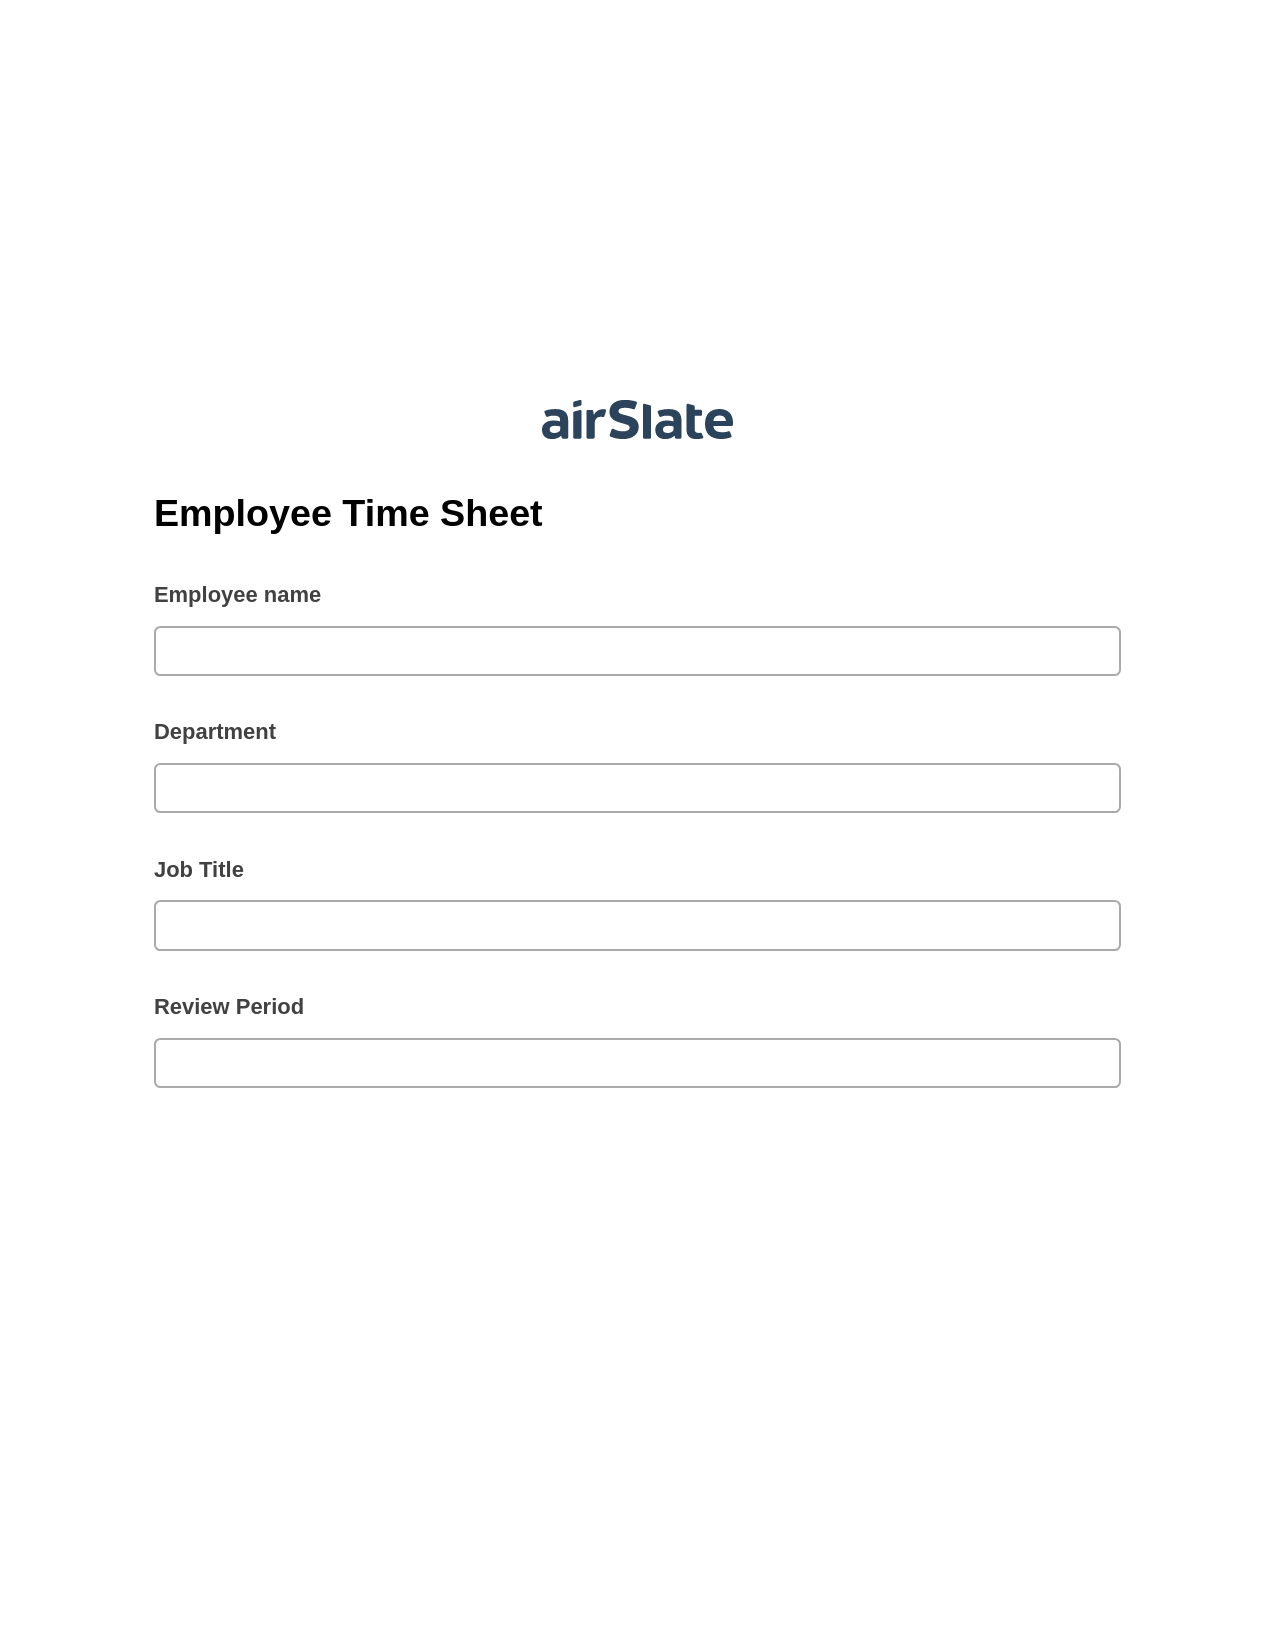 Employee Time Sheet Pre-fill Dropdowns from CSV file Bot, Create slate addon, Export to Google Sheet Bot